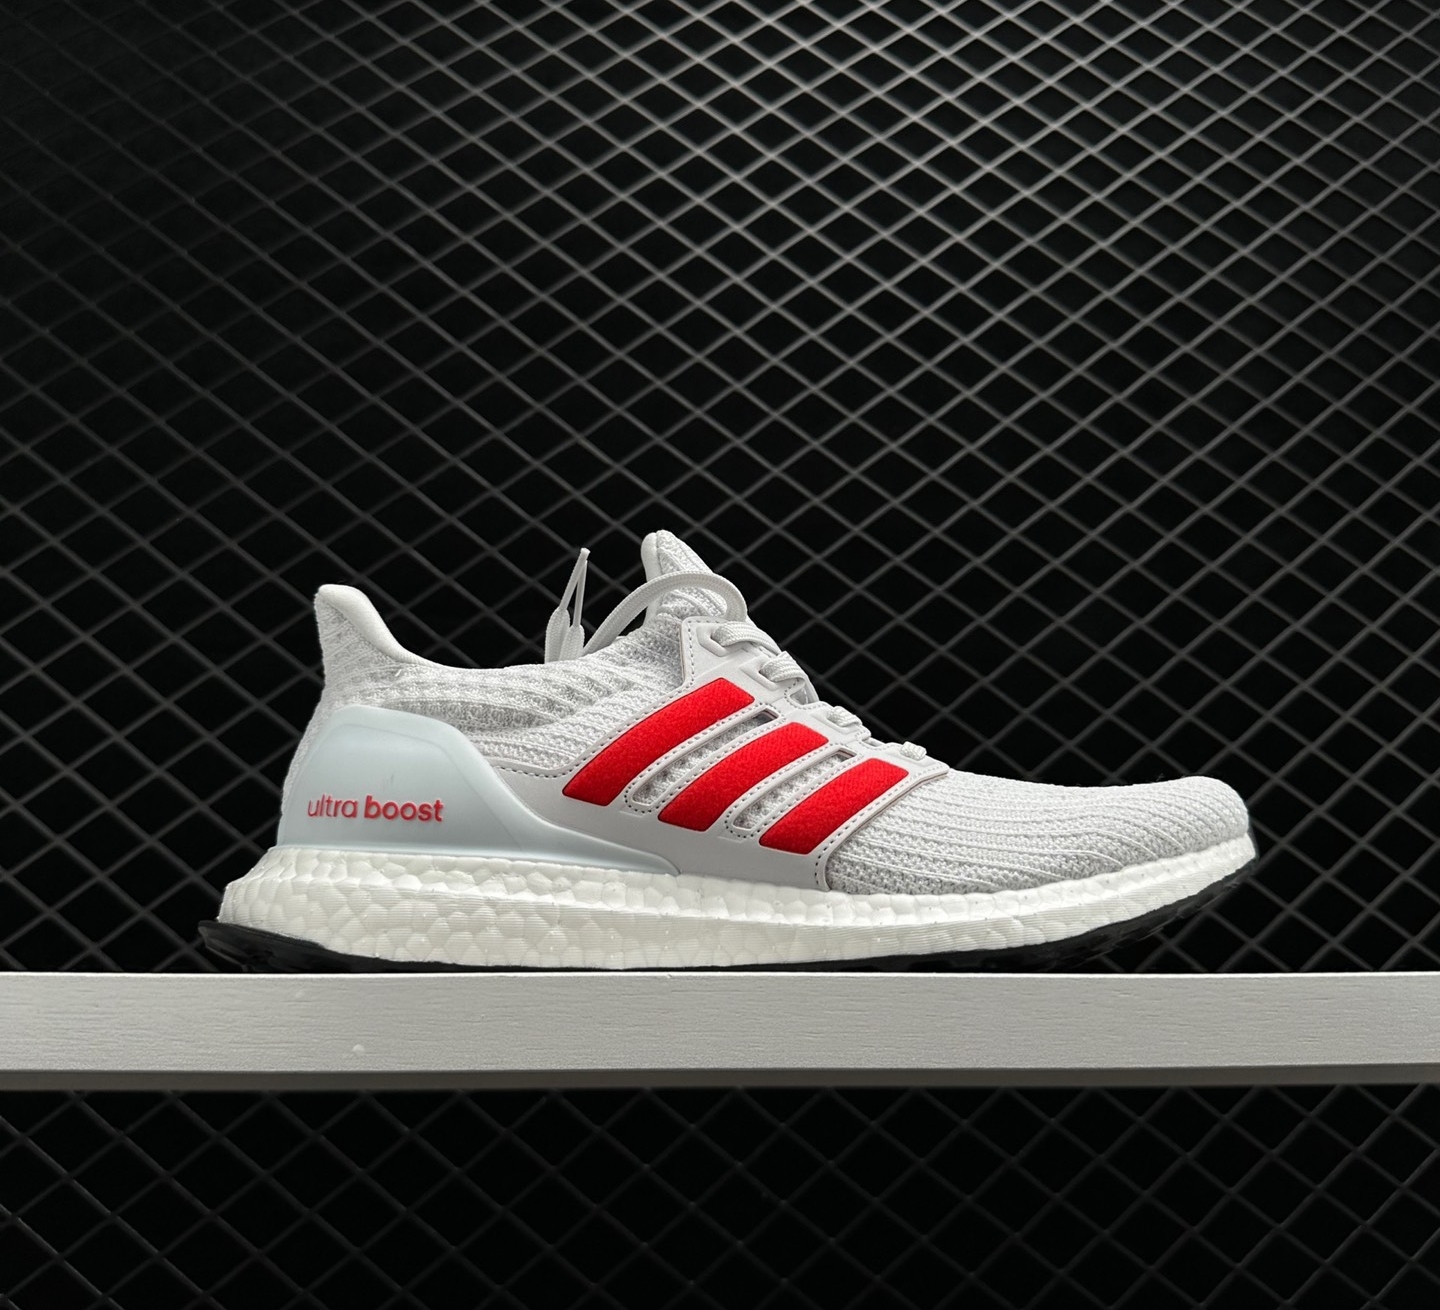 Adidas UltraBoost 4.0 DNA White Scarlet FY9336 - Stylish Athletic Sneakers